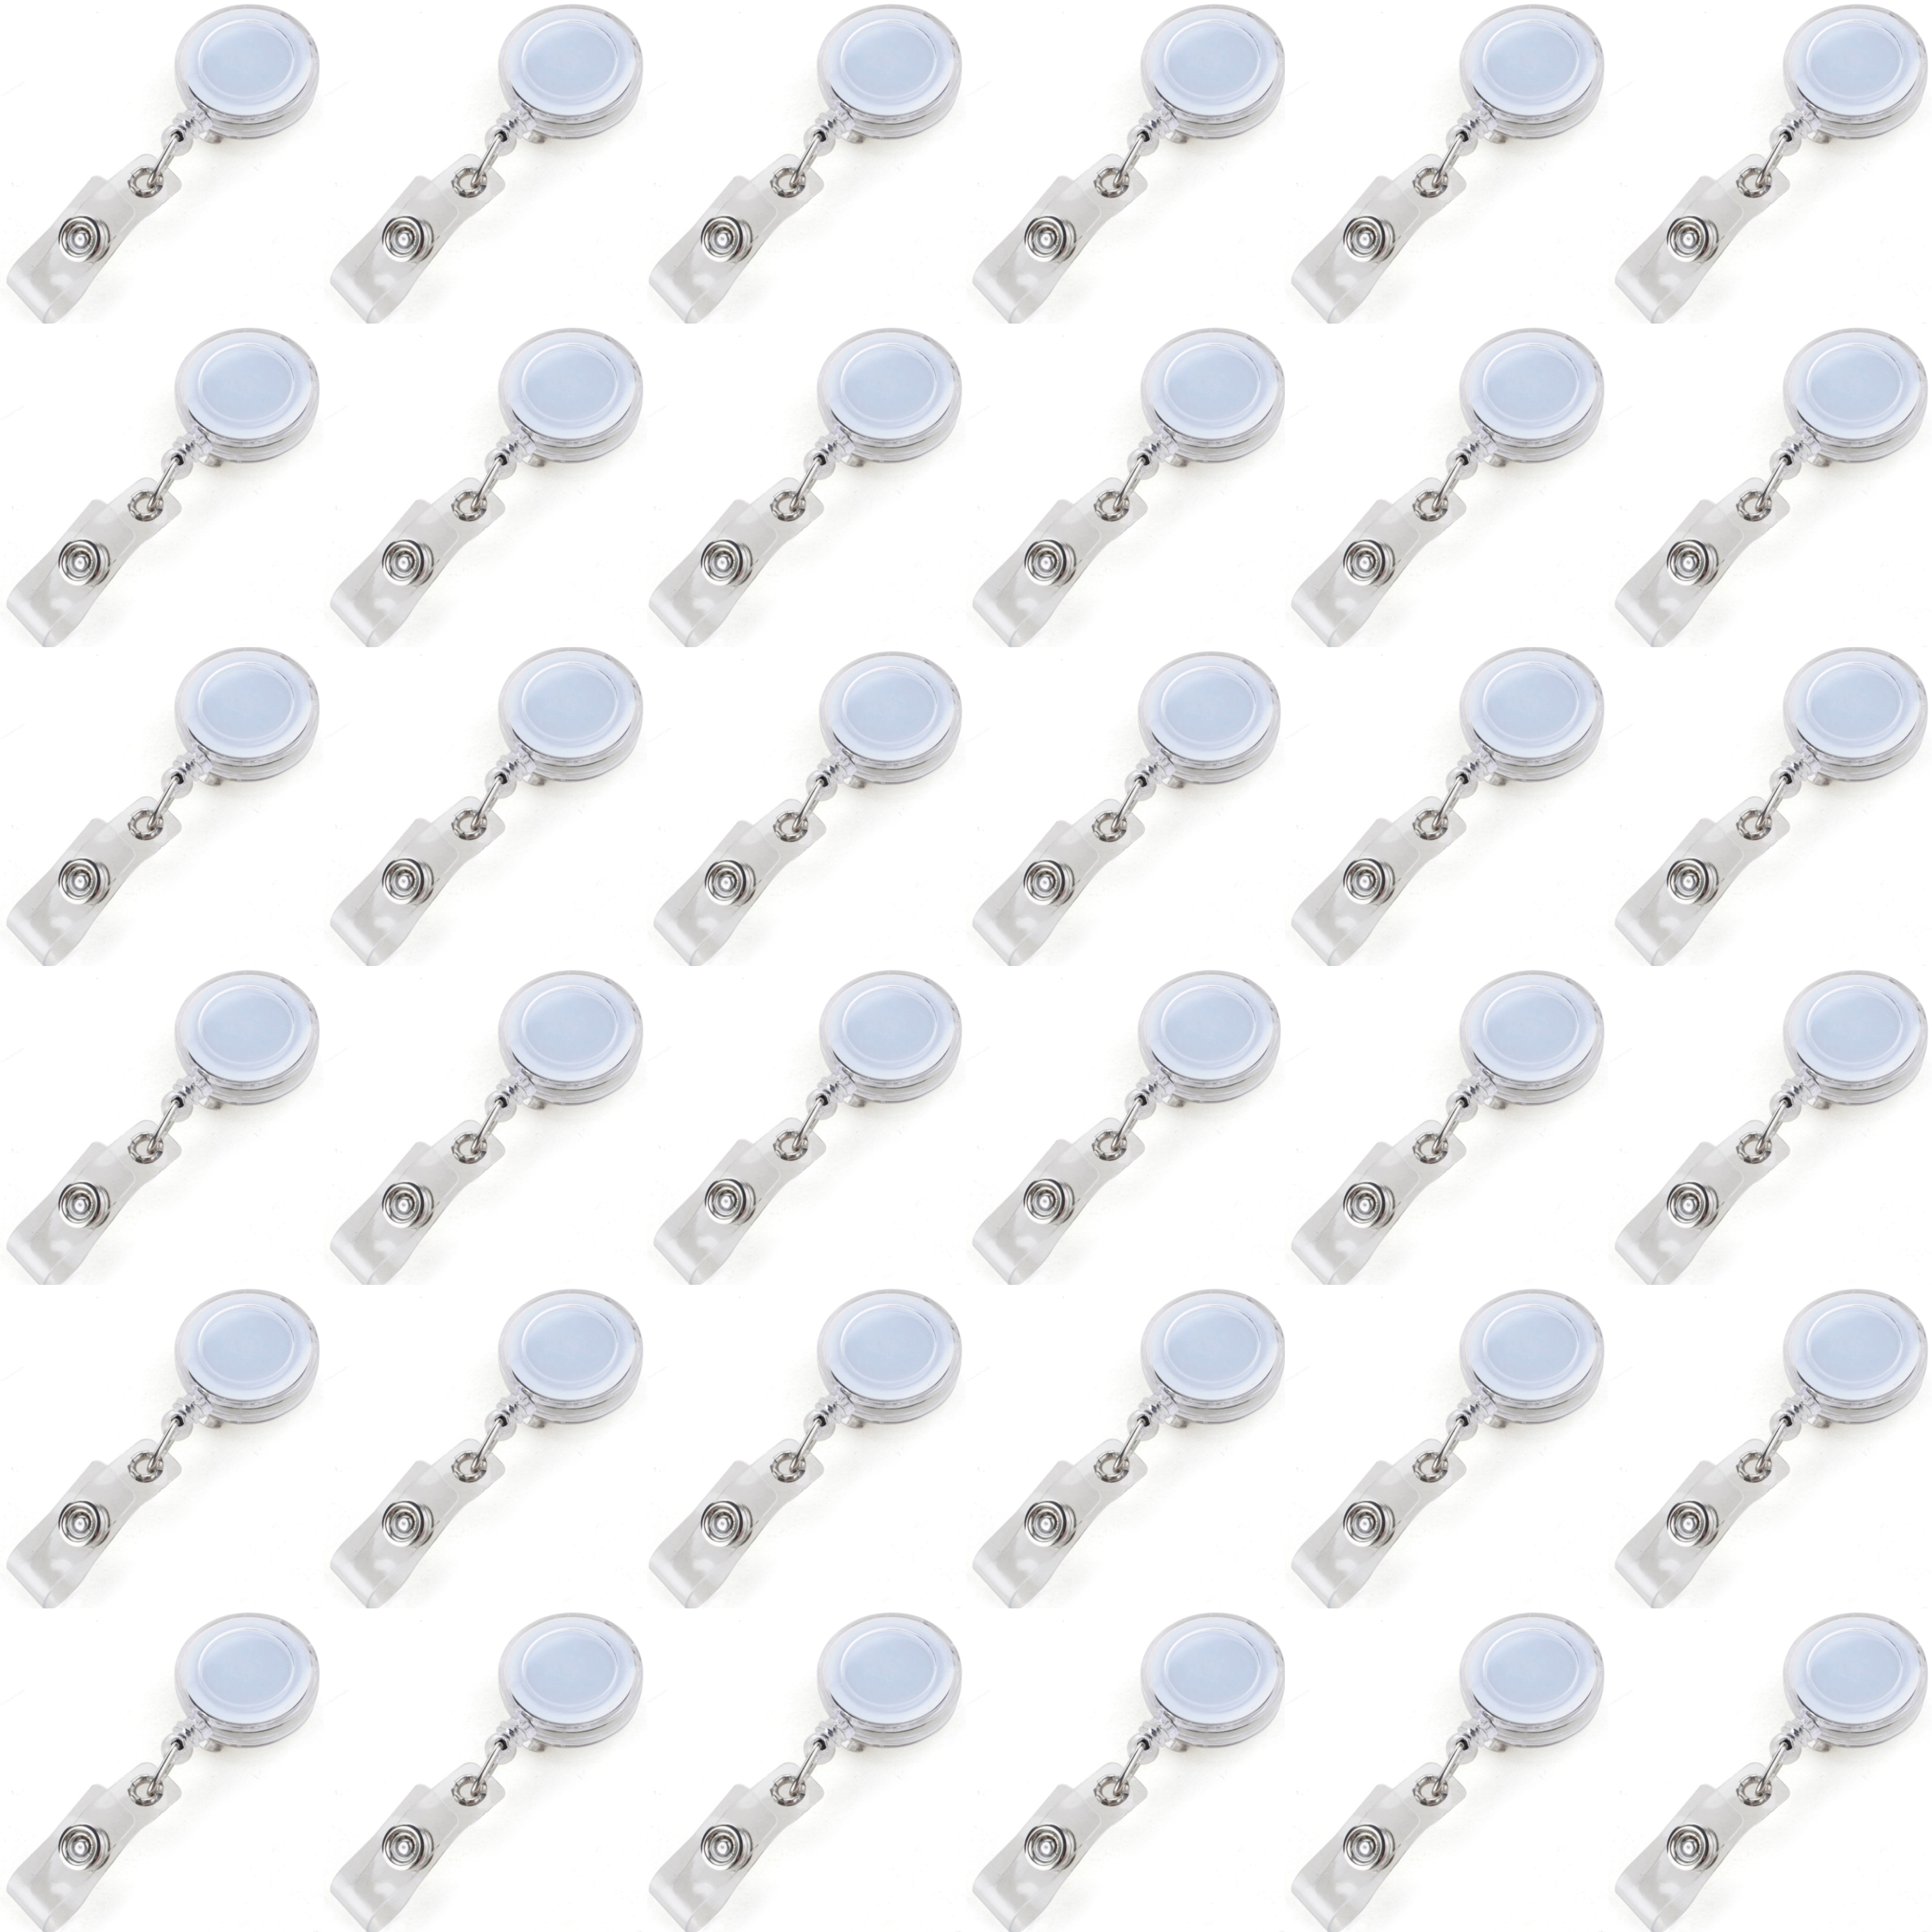 100PCS Secure Retractable Badge Holder ID Reel Clip On Card-Solid Assorted